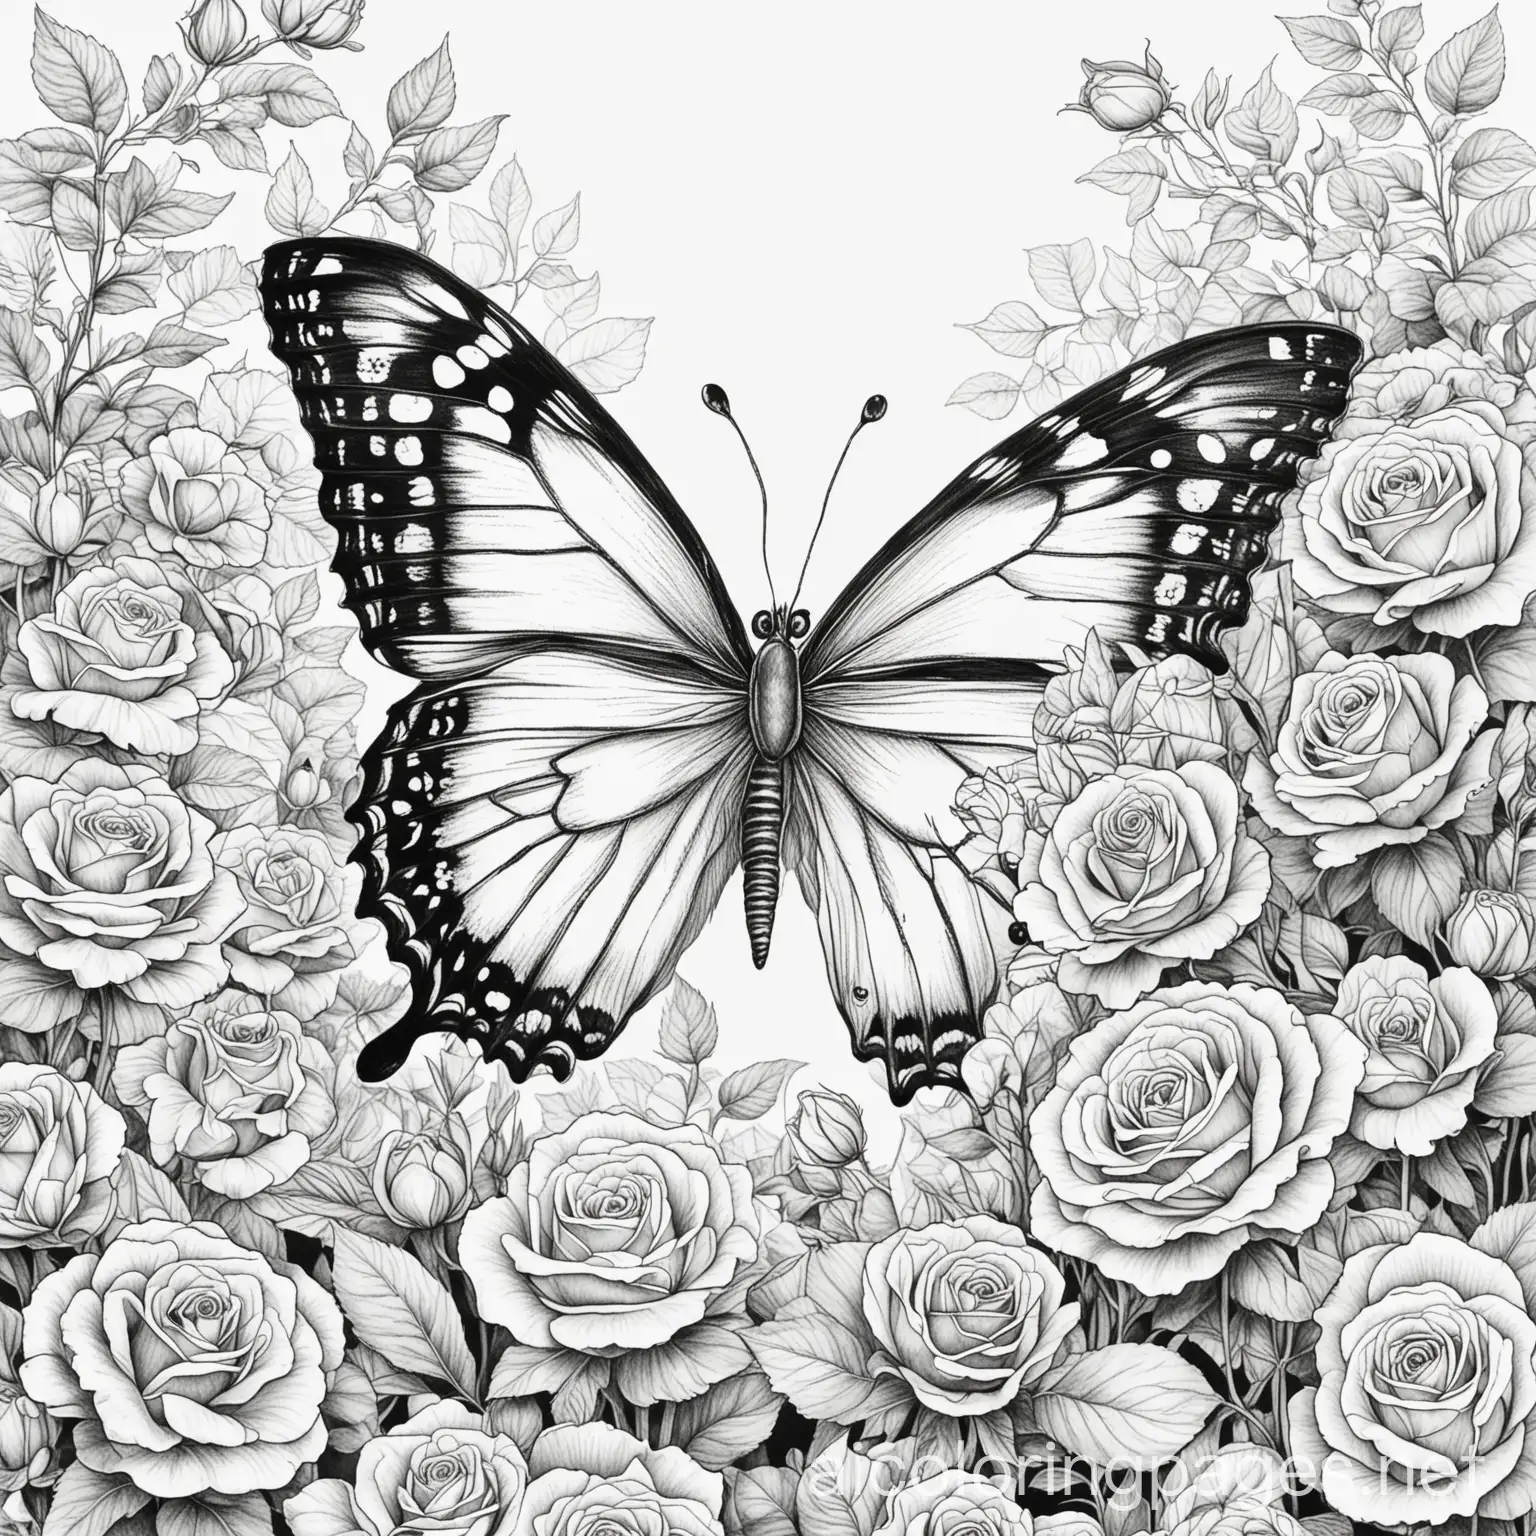 a butterfly in a garden of roses, Coloring Page, black and white, line art, white background, Simplicity, Ample White Space. The background of the coloring page is plain white to make it easy for young children to color within the lines. The outlines of all the subjects are easy to distinguish, making it simple for kids to color without too much difficulty